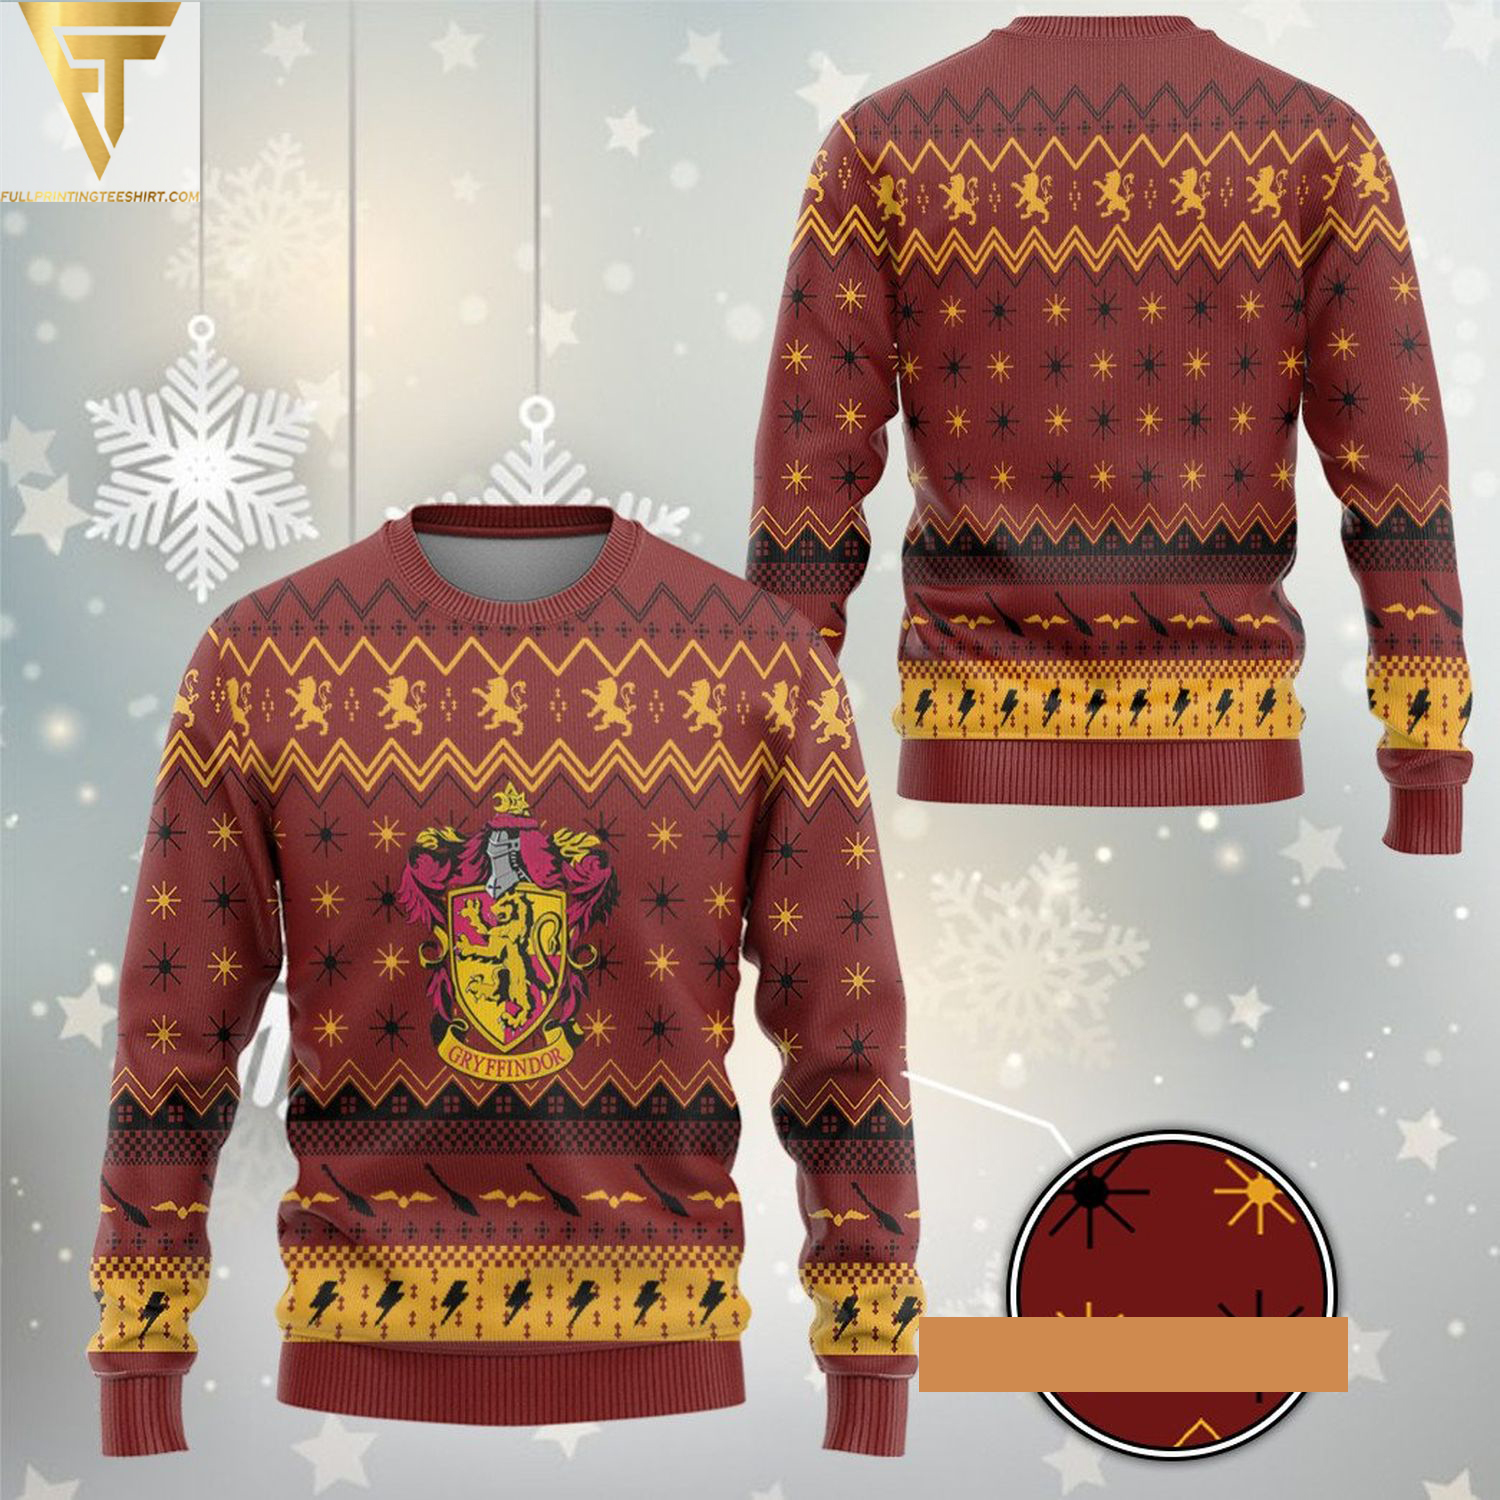 Harry potter gryffindor holiday ugly christmas sweater - Copy (4)